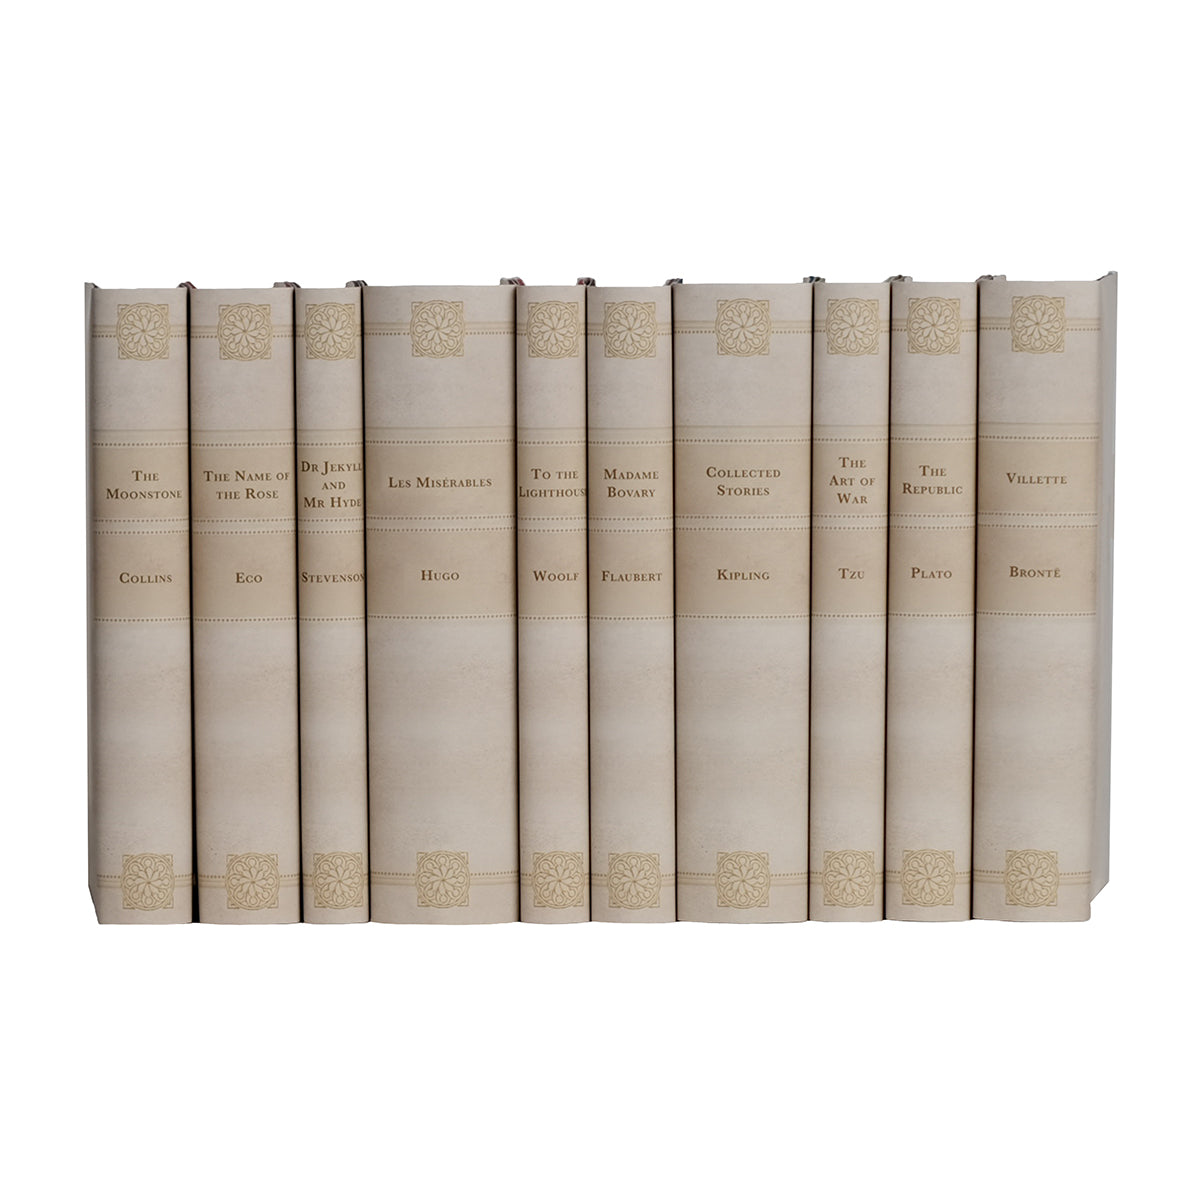 Everyman's Library Classics with Vellum-Style Jackets in Sets of 10